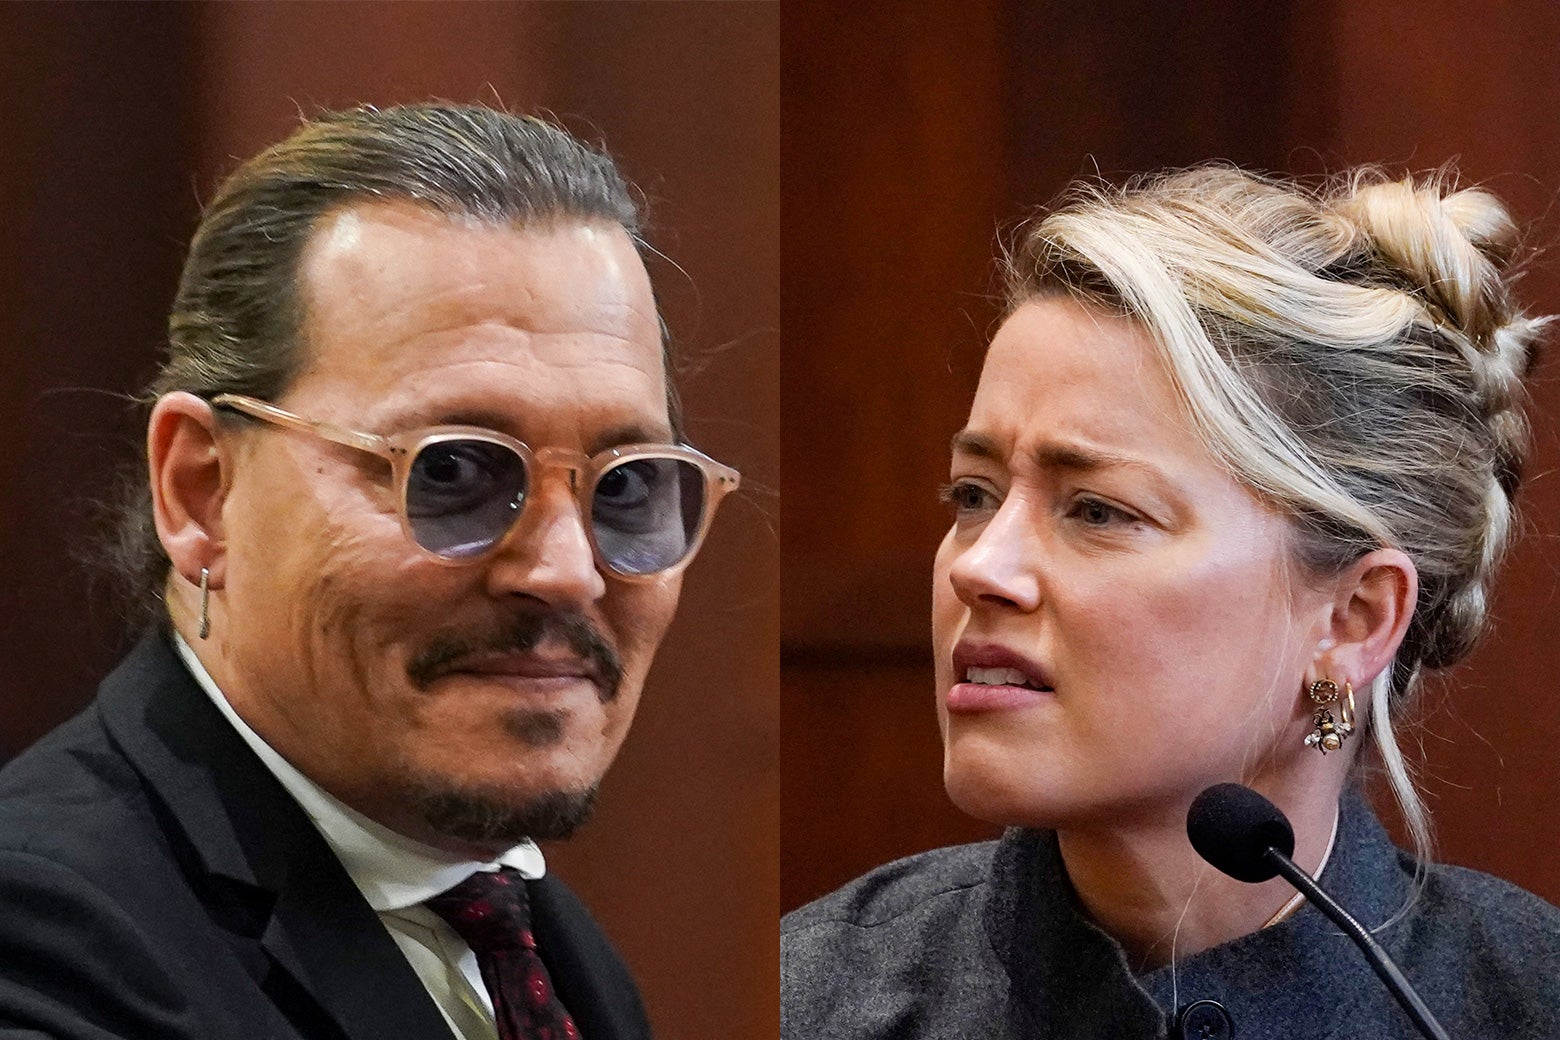 Johnny Depp Amber Heard how the trial and verdict duped America. pic